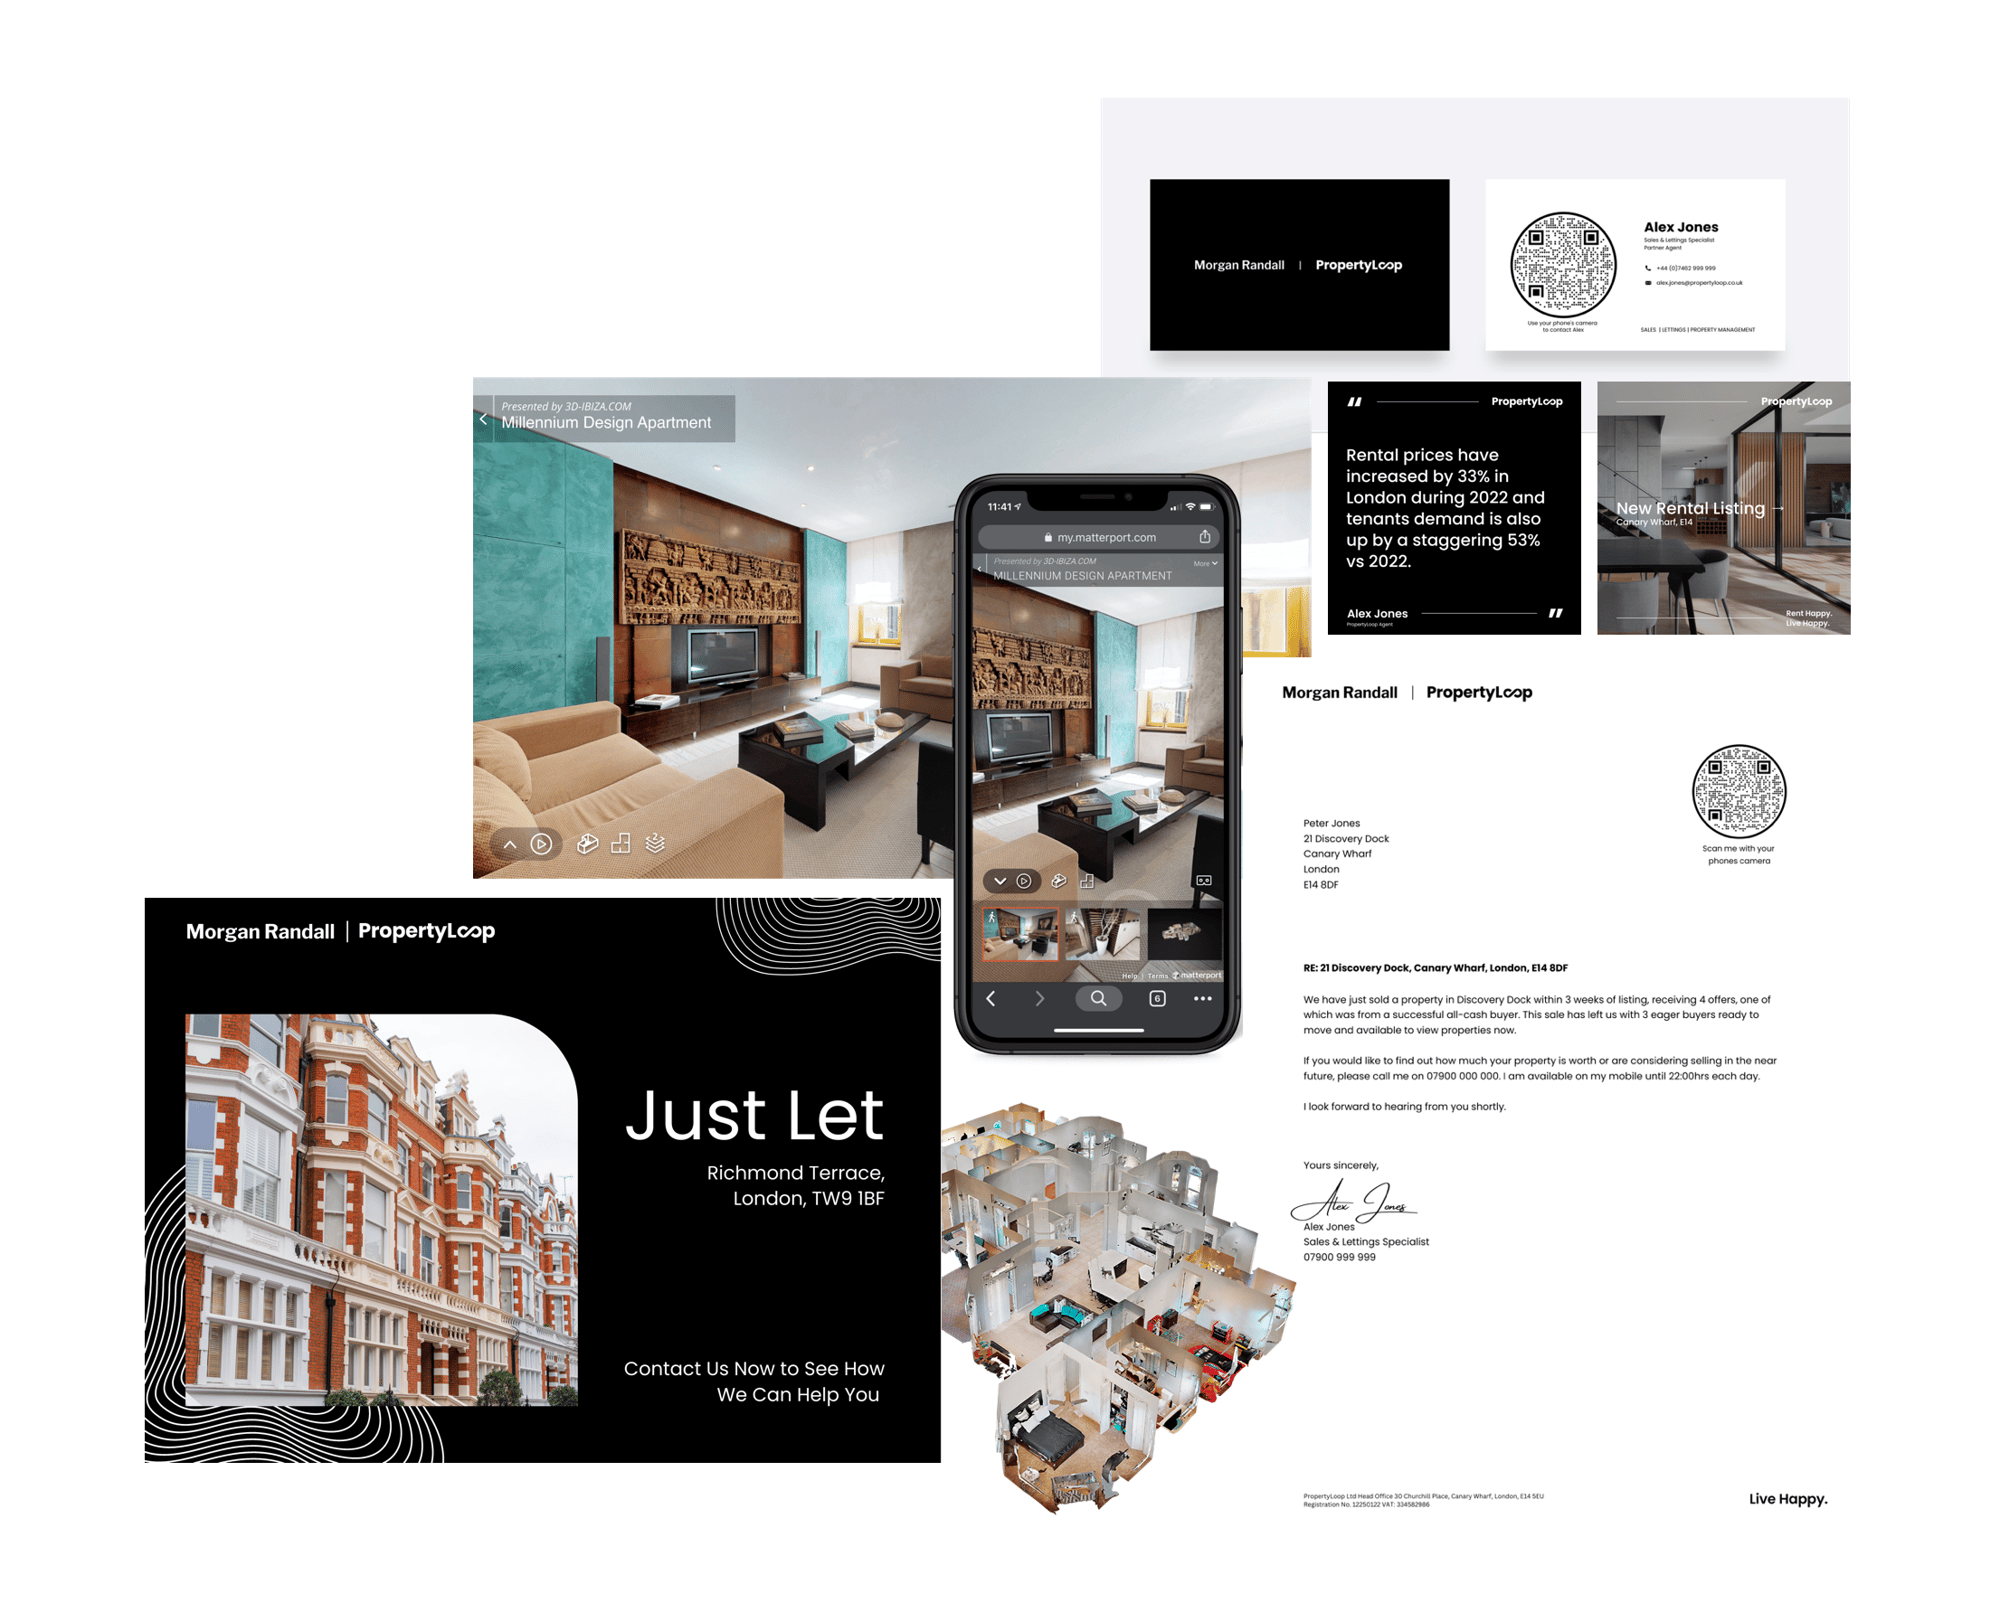 Elevate Your Brand With Effortless Style Using PropertyLoop's Accessible Templates.